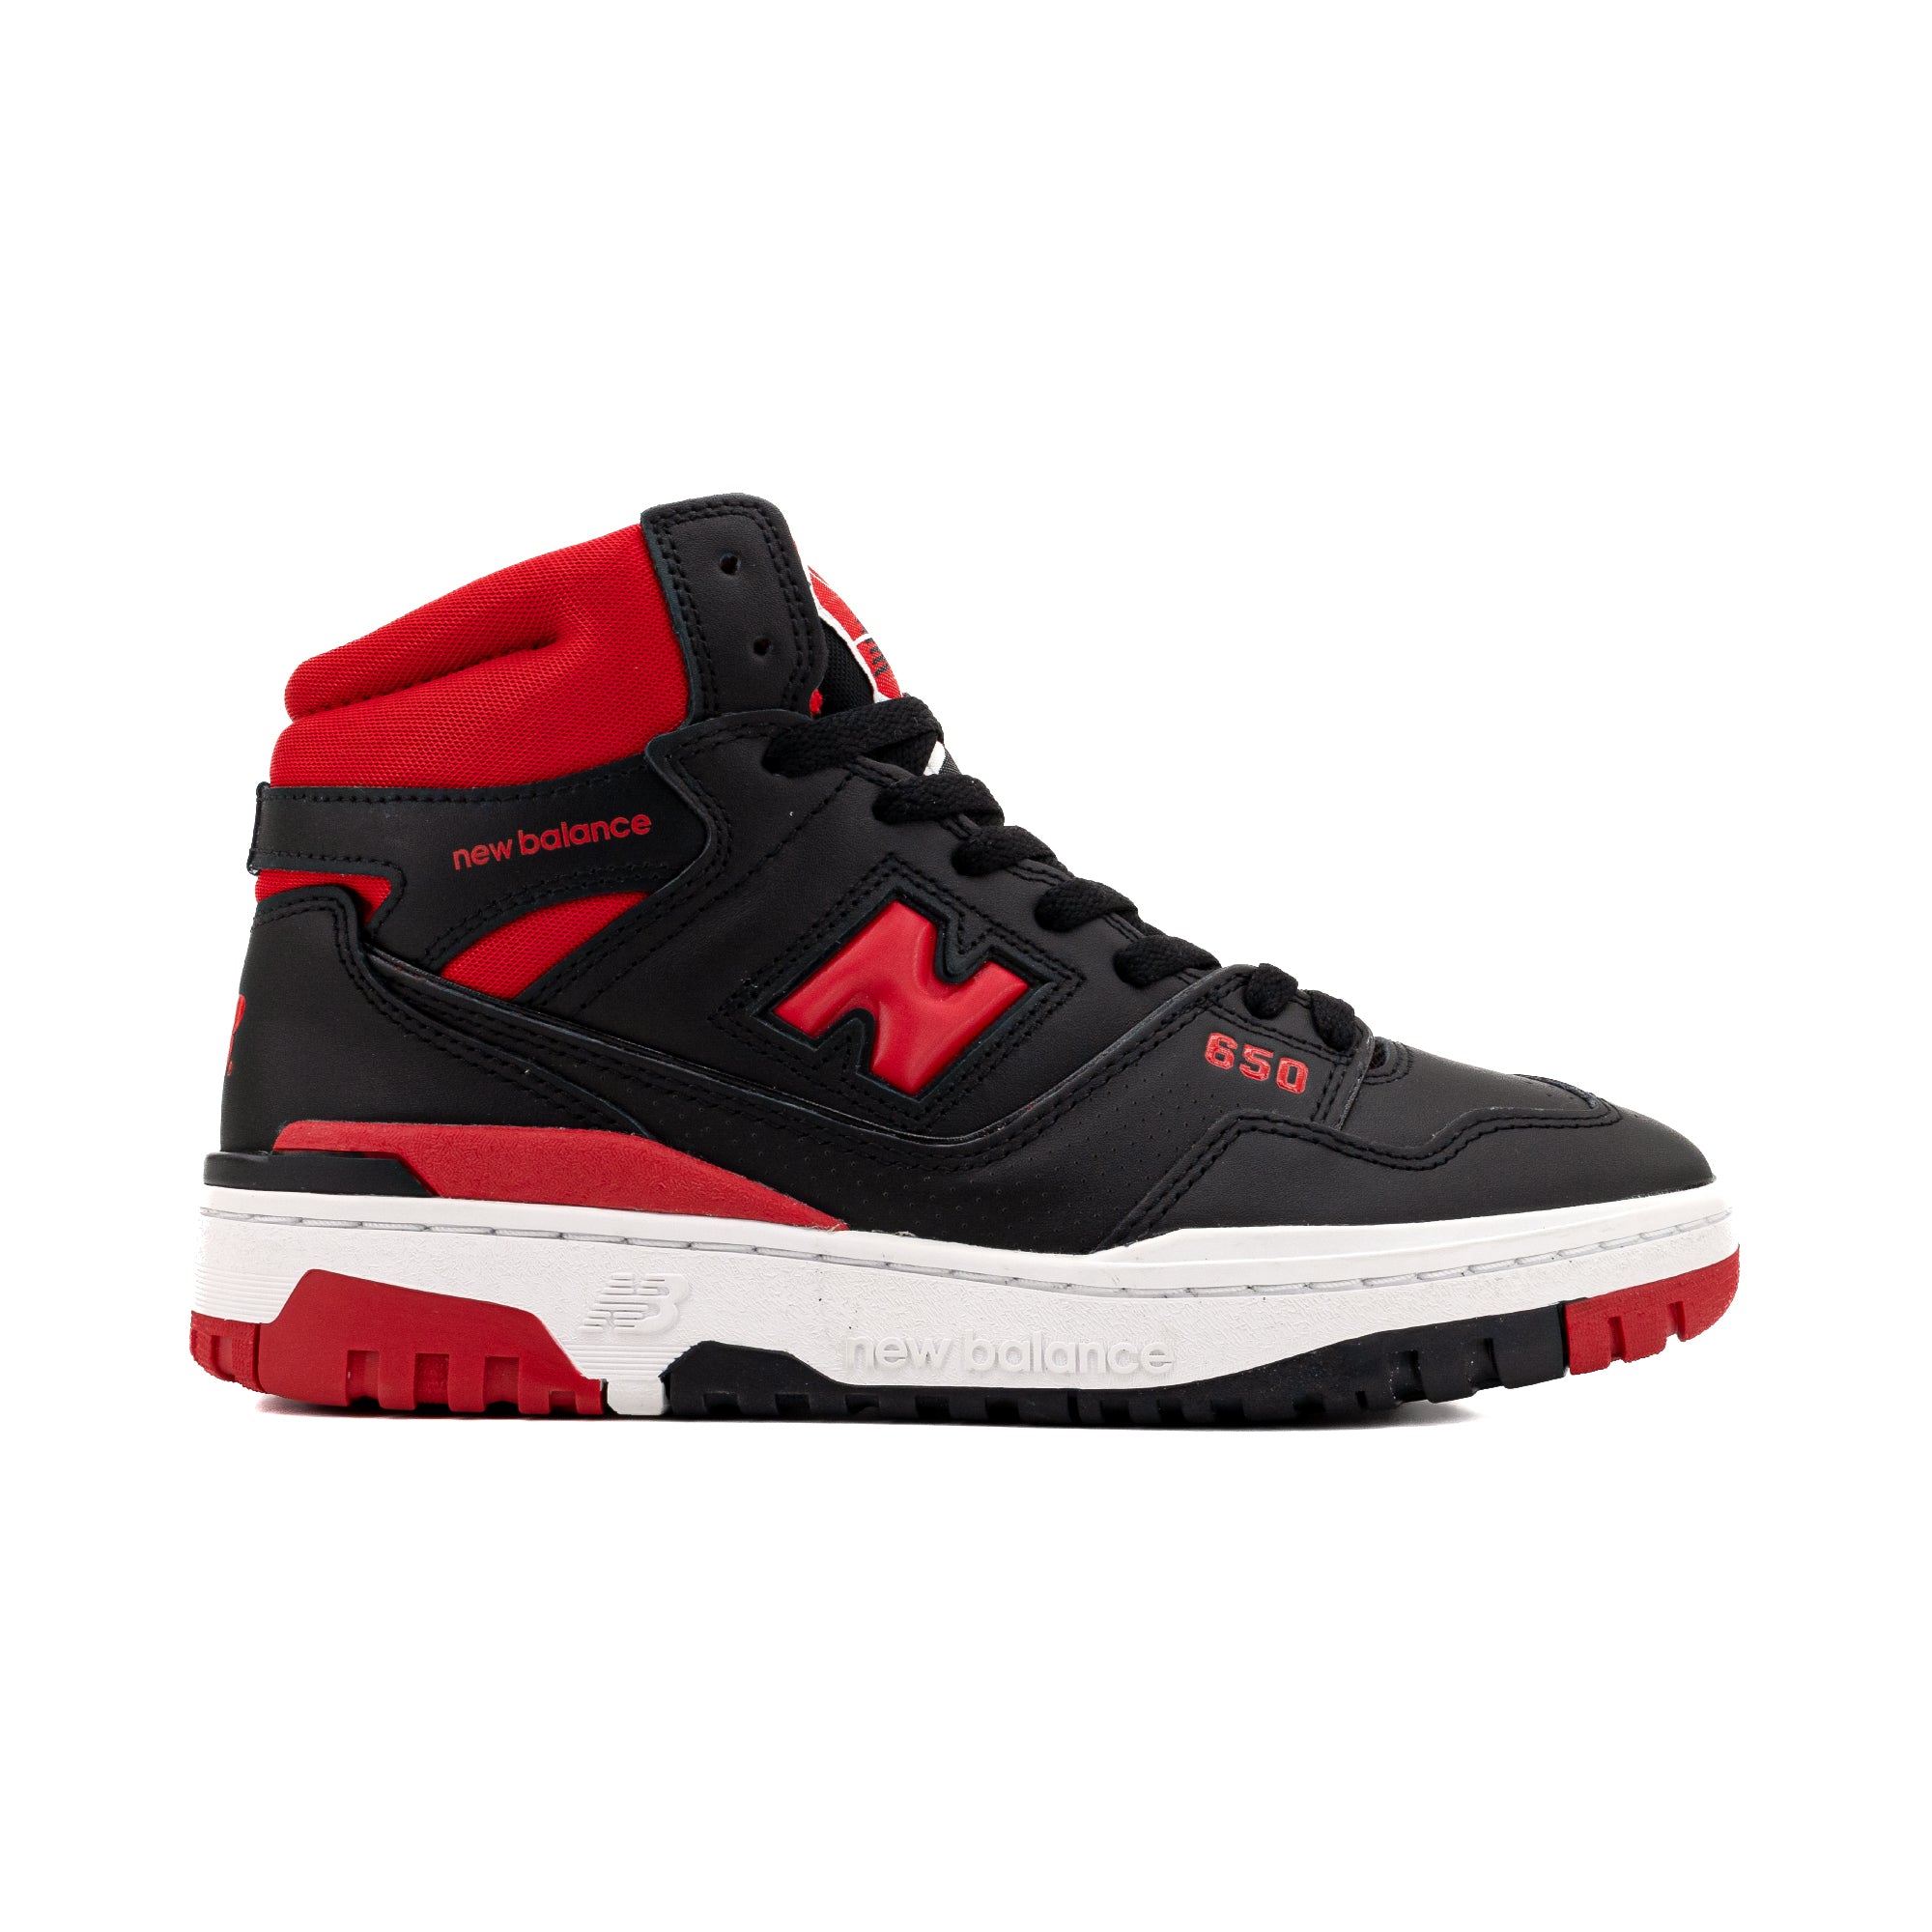 New Balance 650 Black/Red/White BB650RBR – Laced